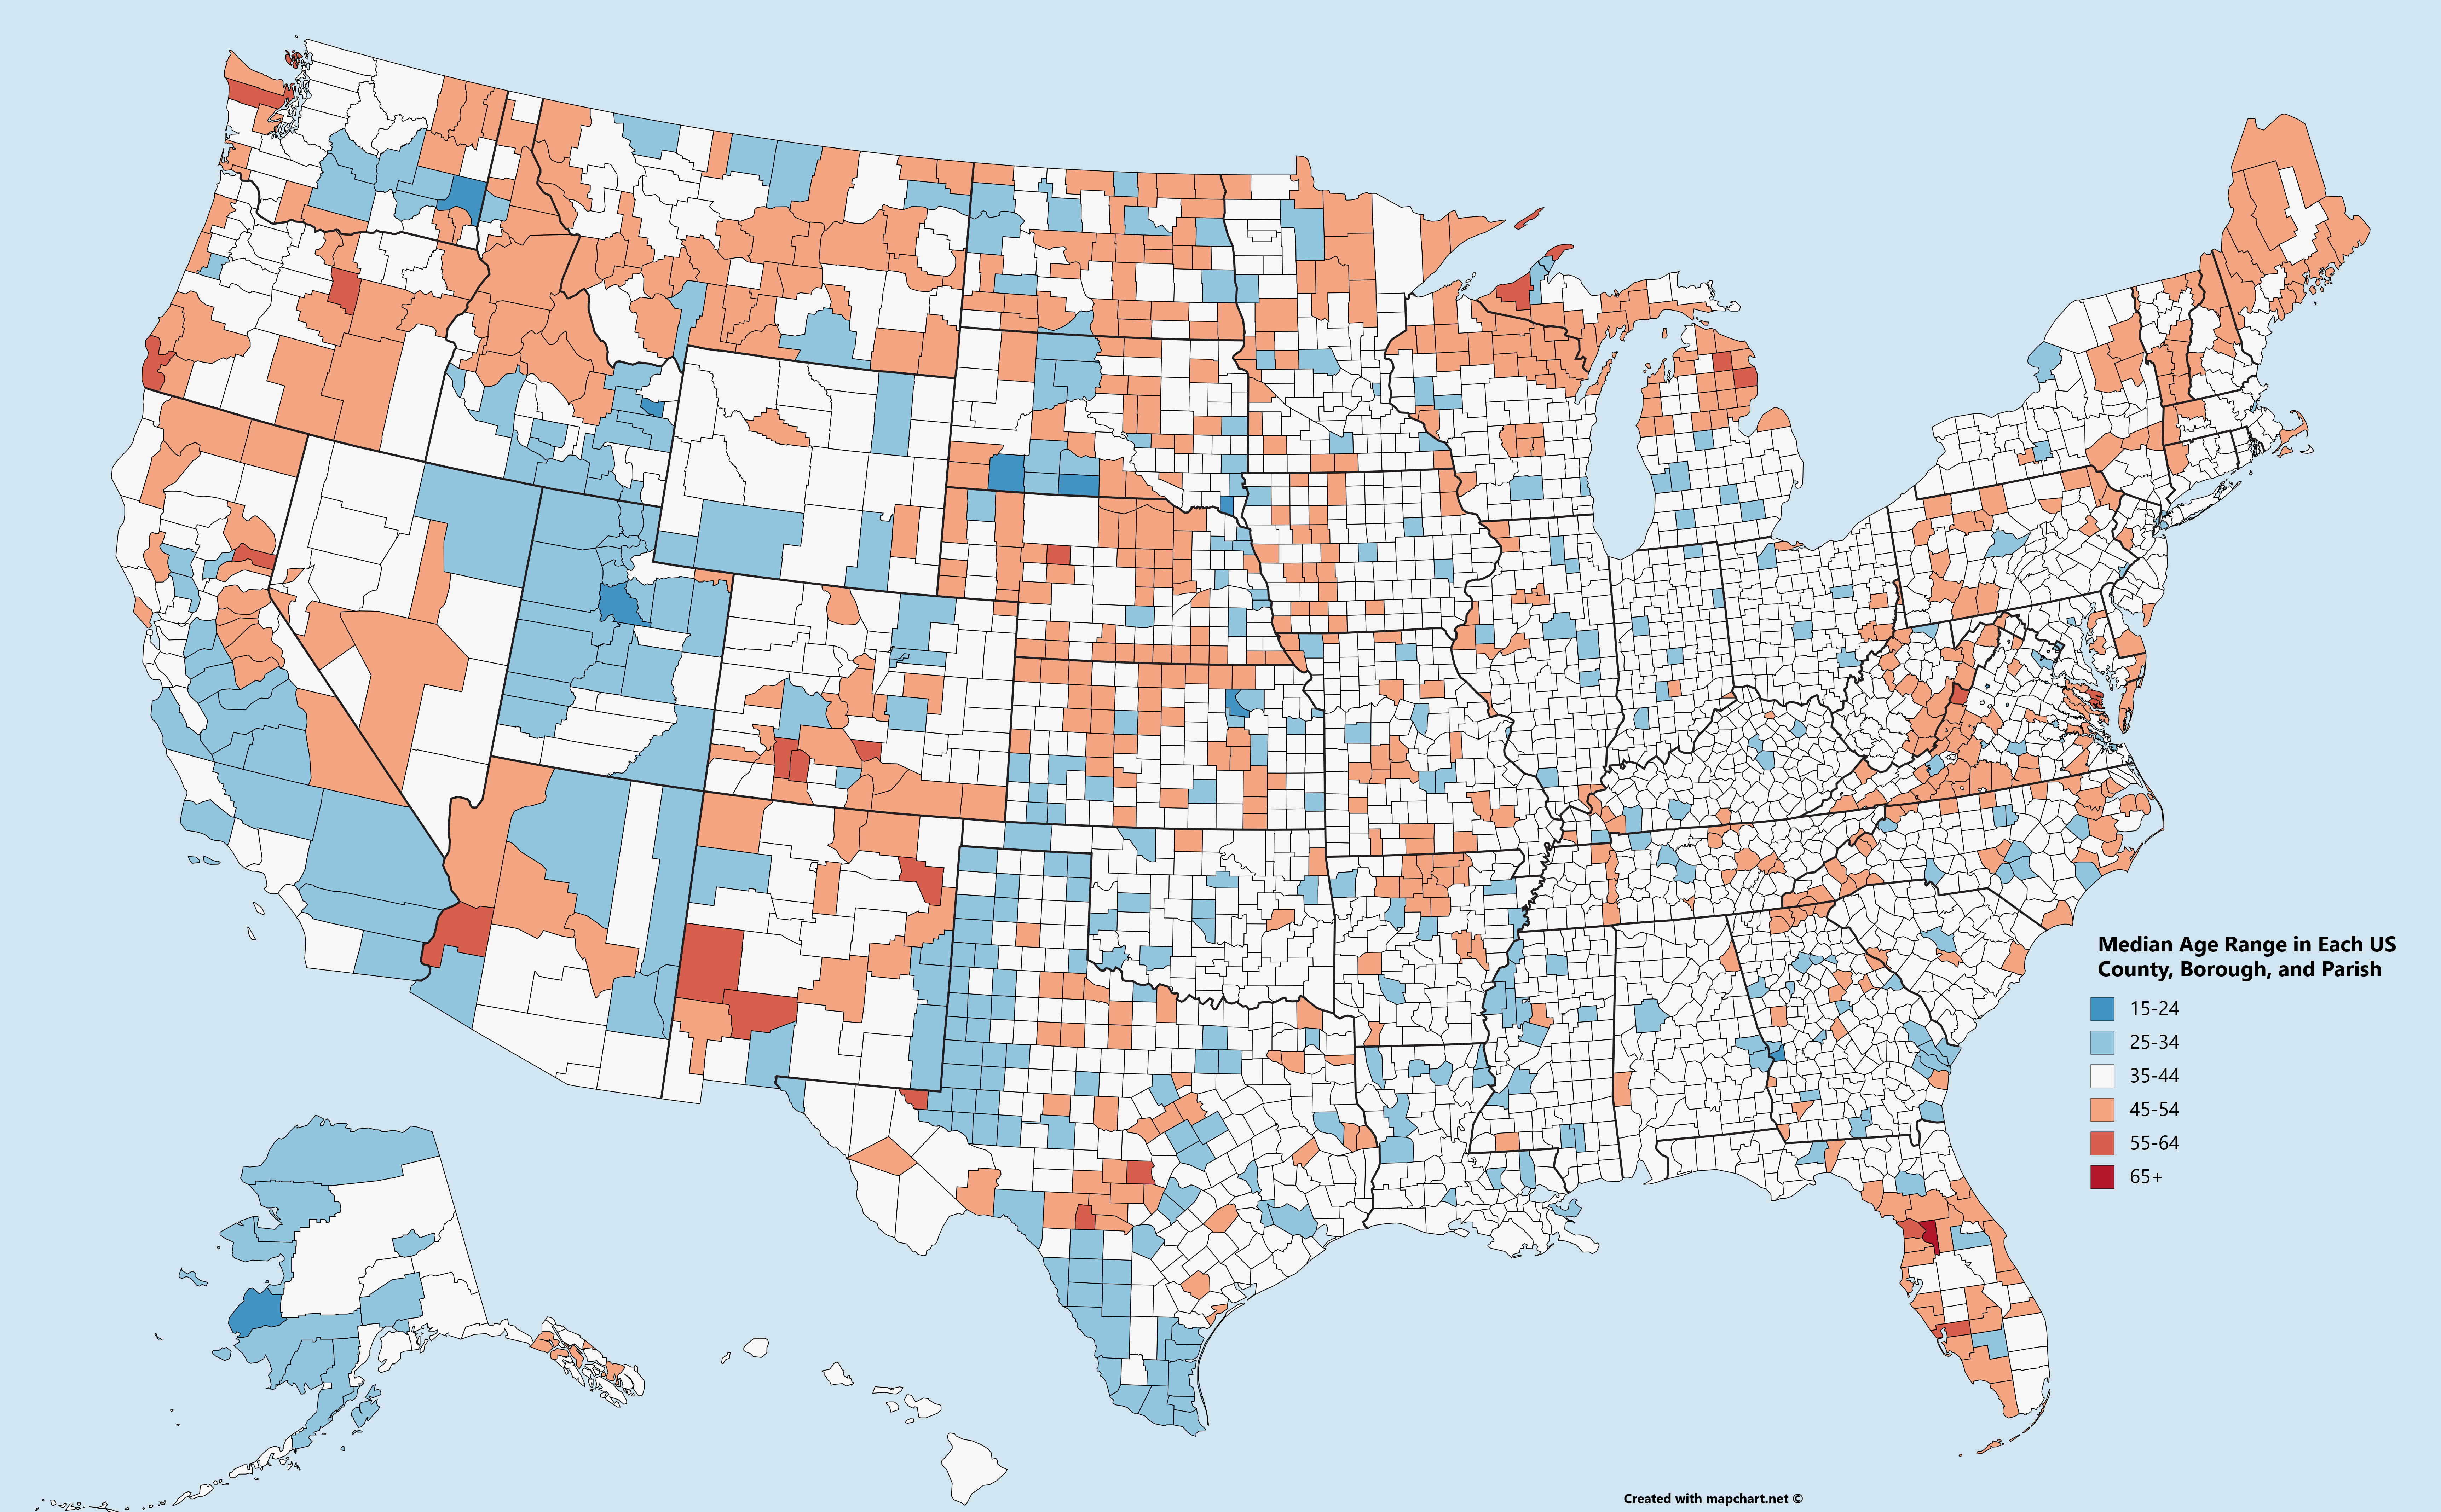 Mapping the Median Age in Every U.S. County